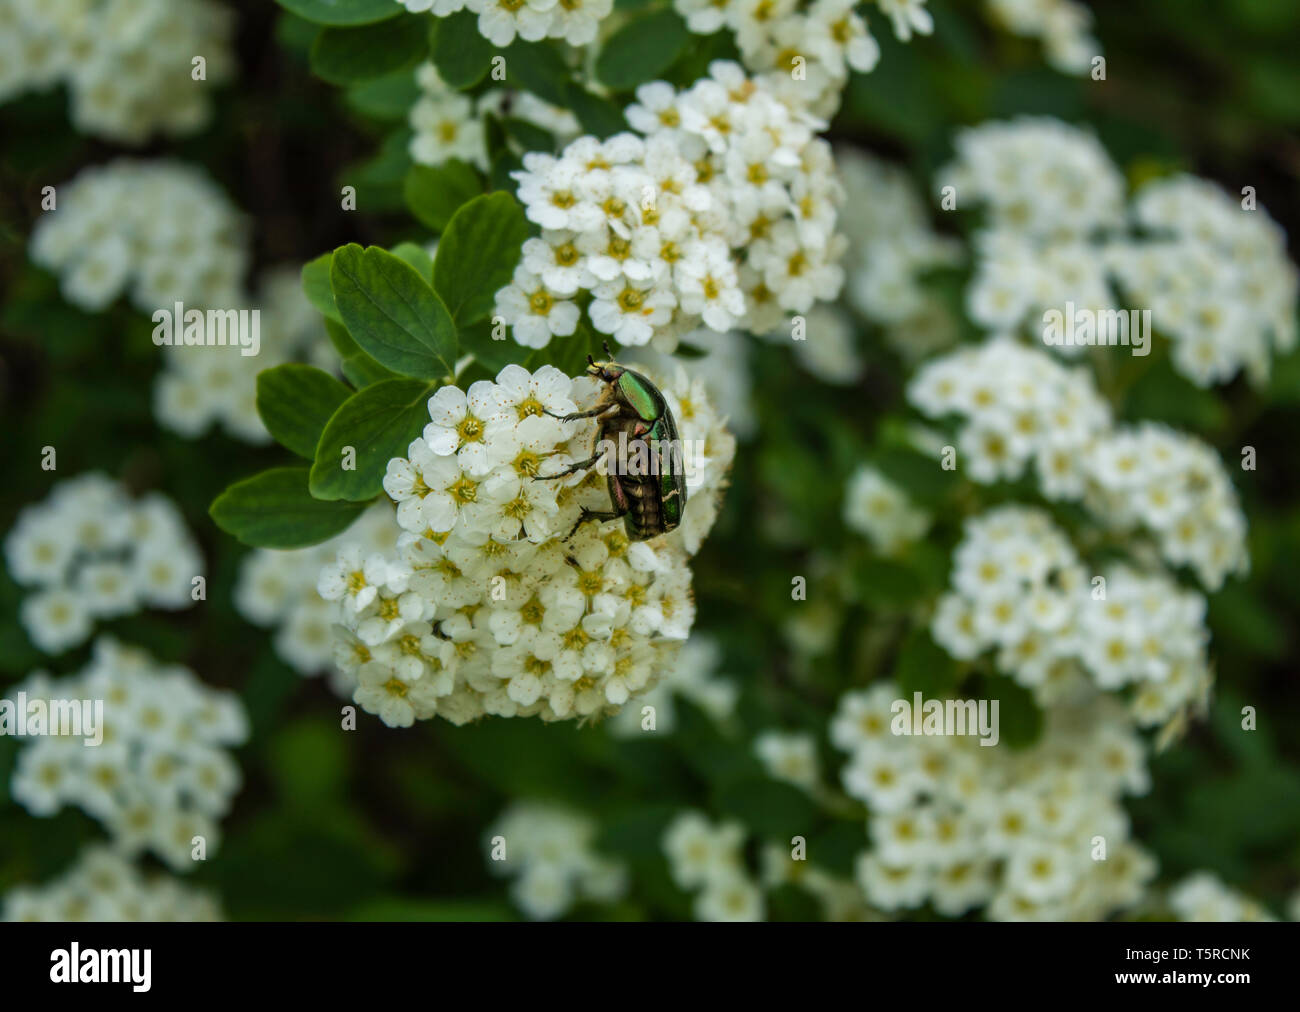 Green beetle looking amazing on bloomed white flowers Stock Photo